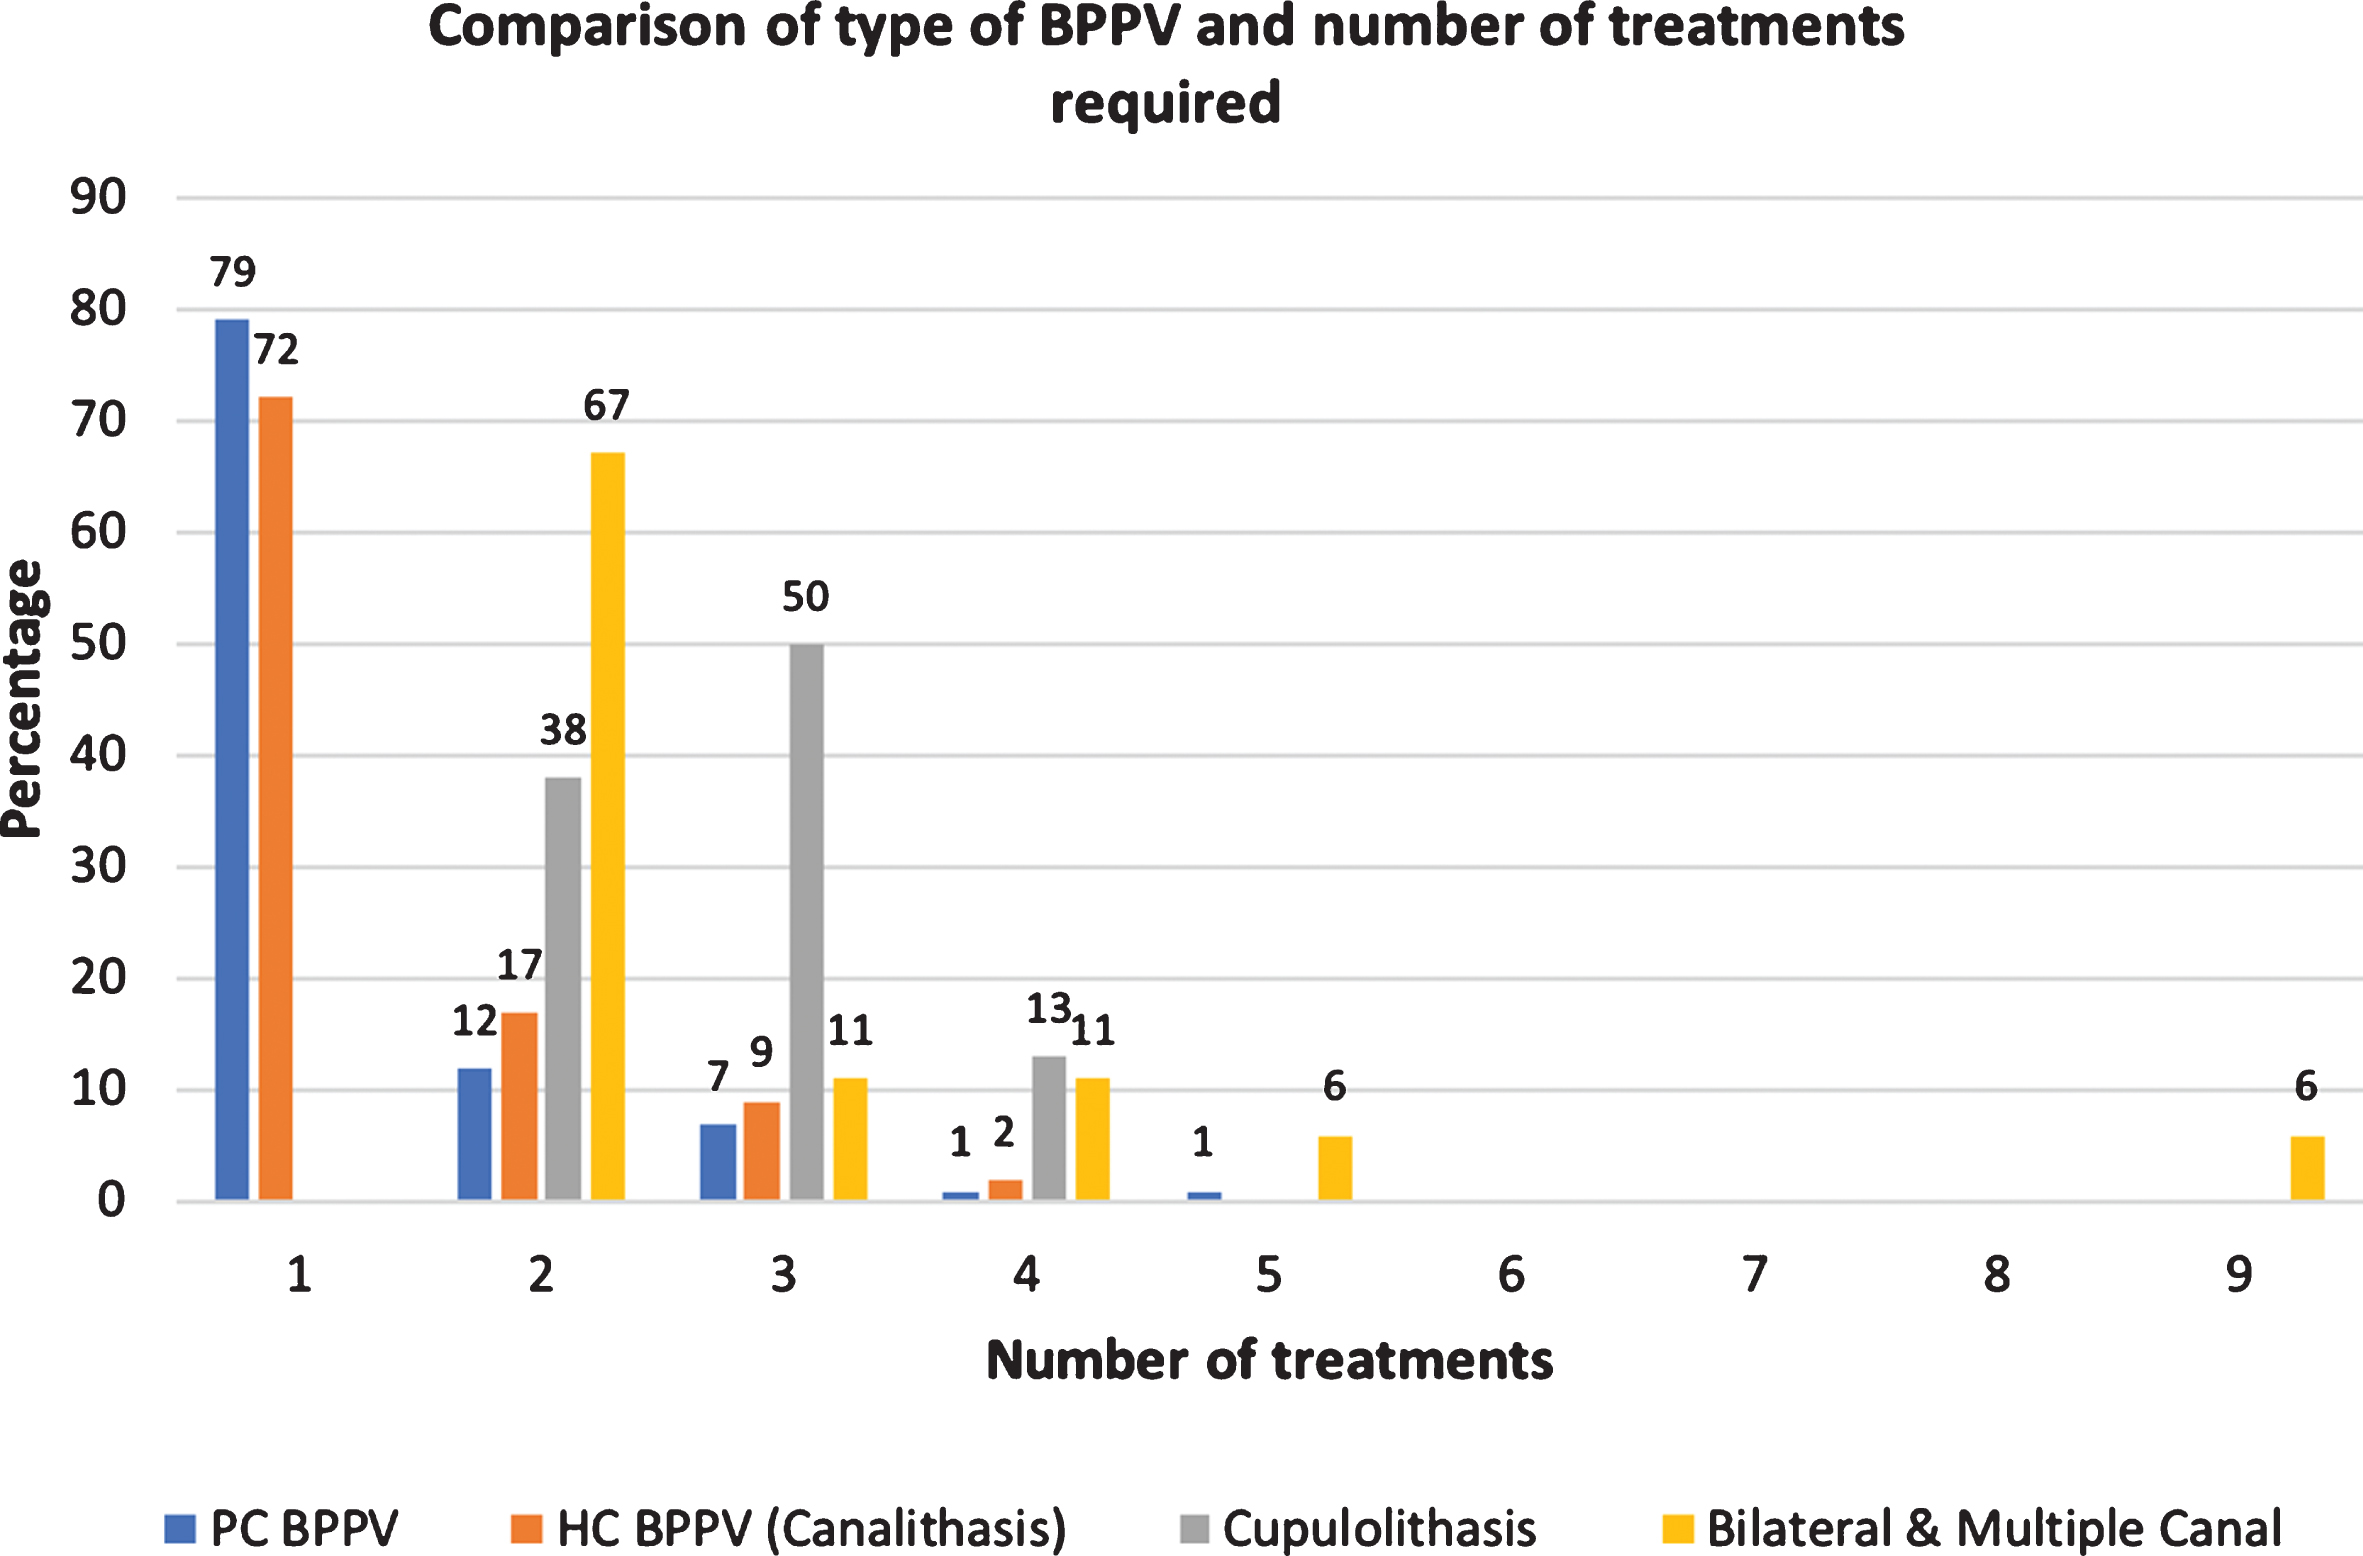 Comparison of type of BPPV and number of treatments required.